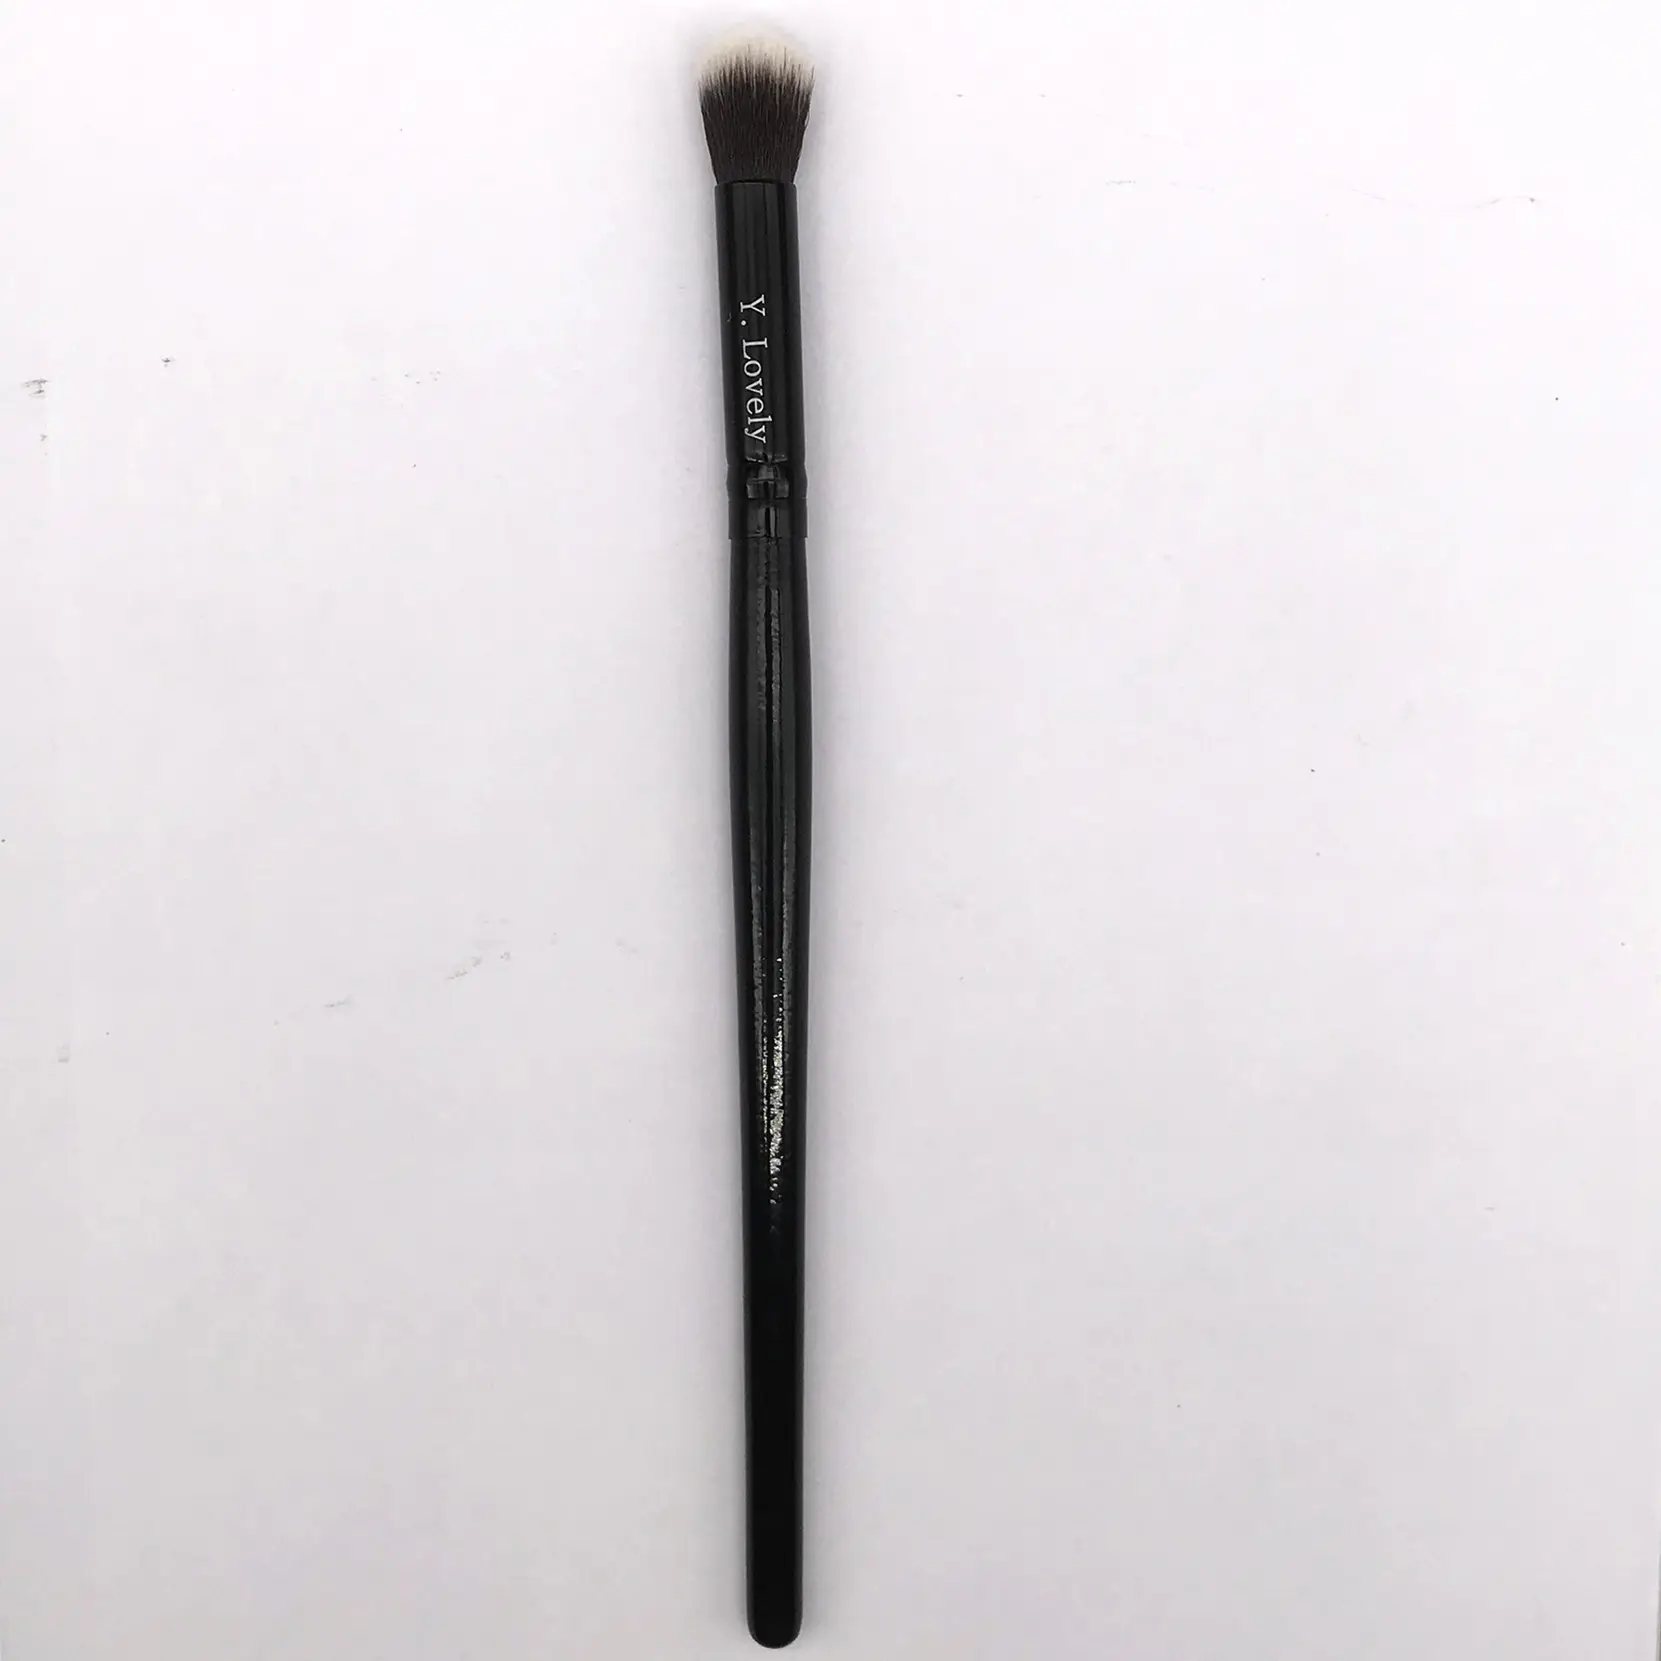 Y.Lovely Single Black Eye Makeup Brush with Soft Synthetic Hairs & Real Wood Handle